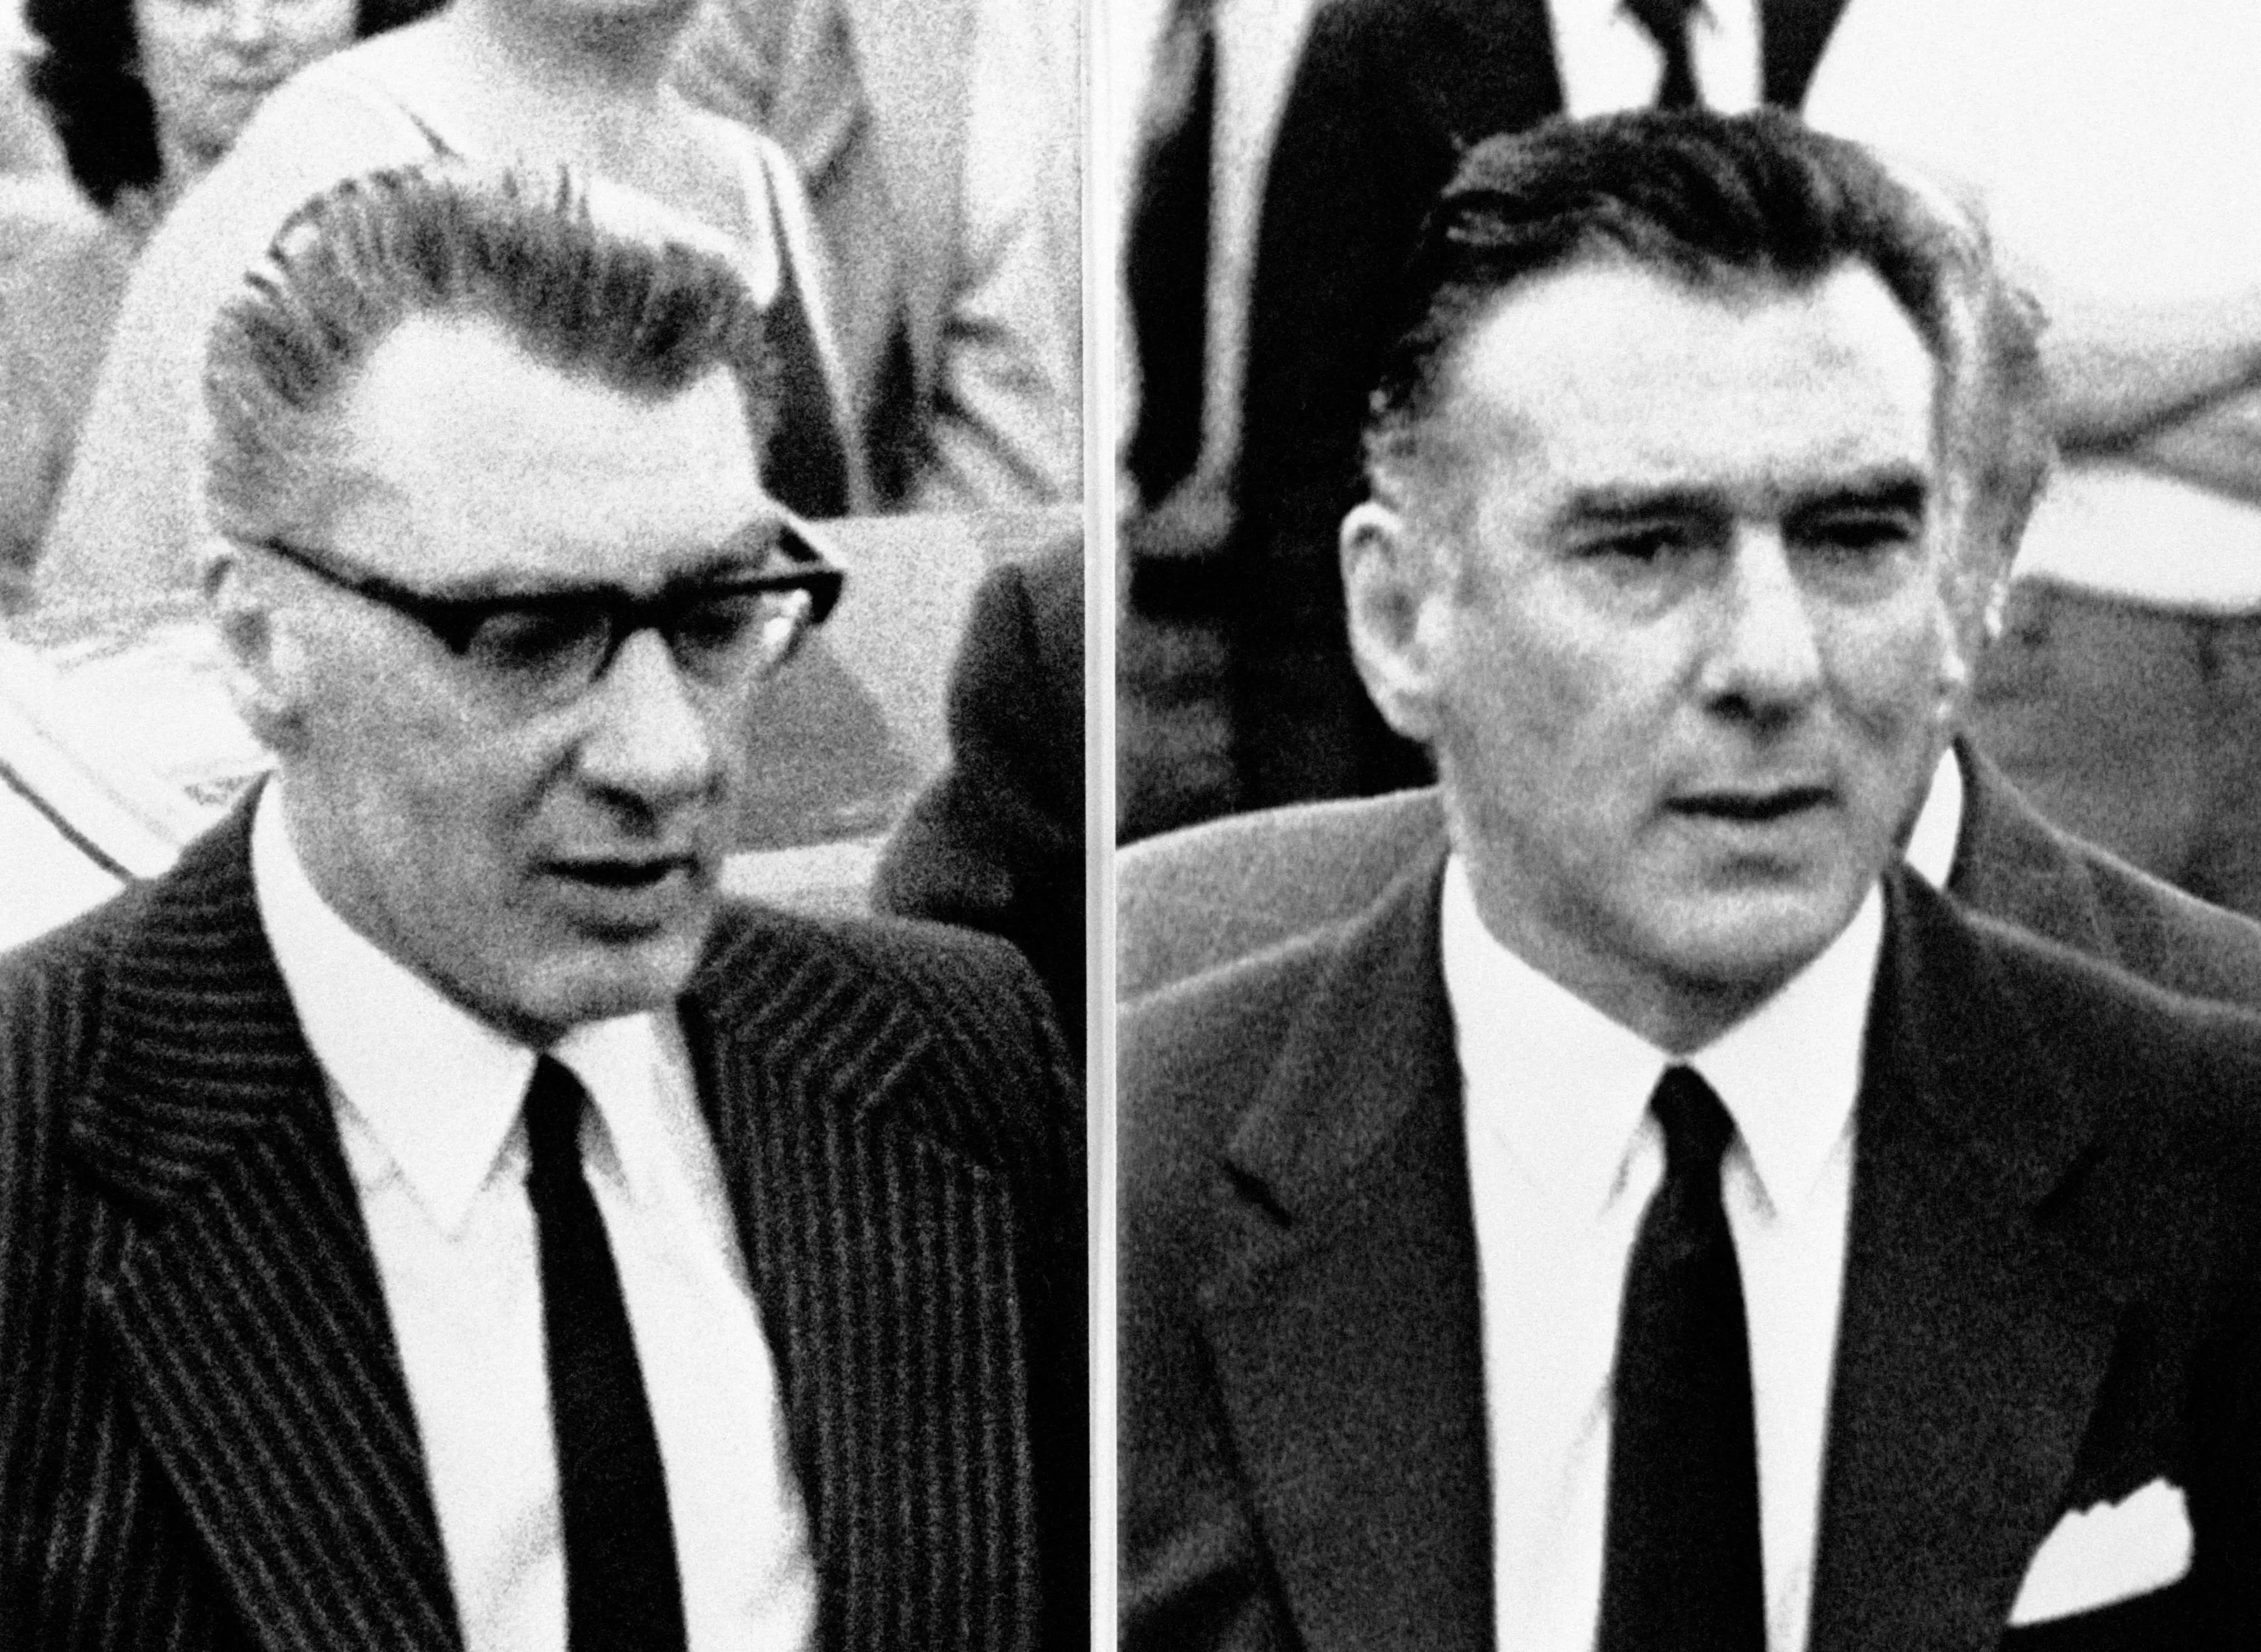 Ronnie (left) and Reggie Kray.